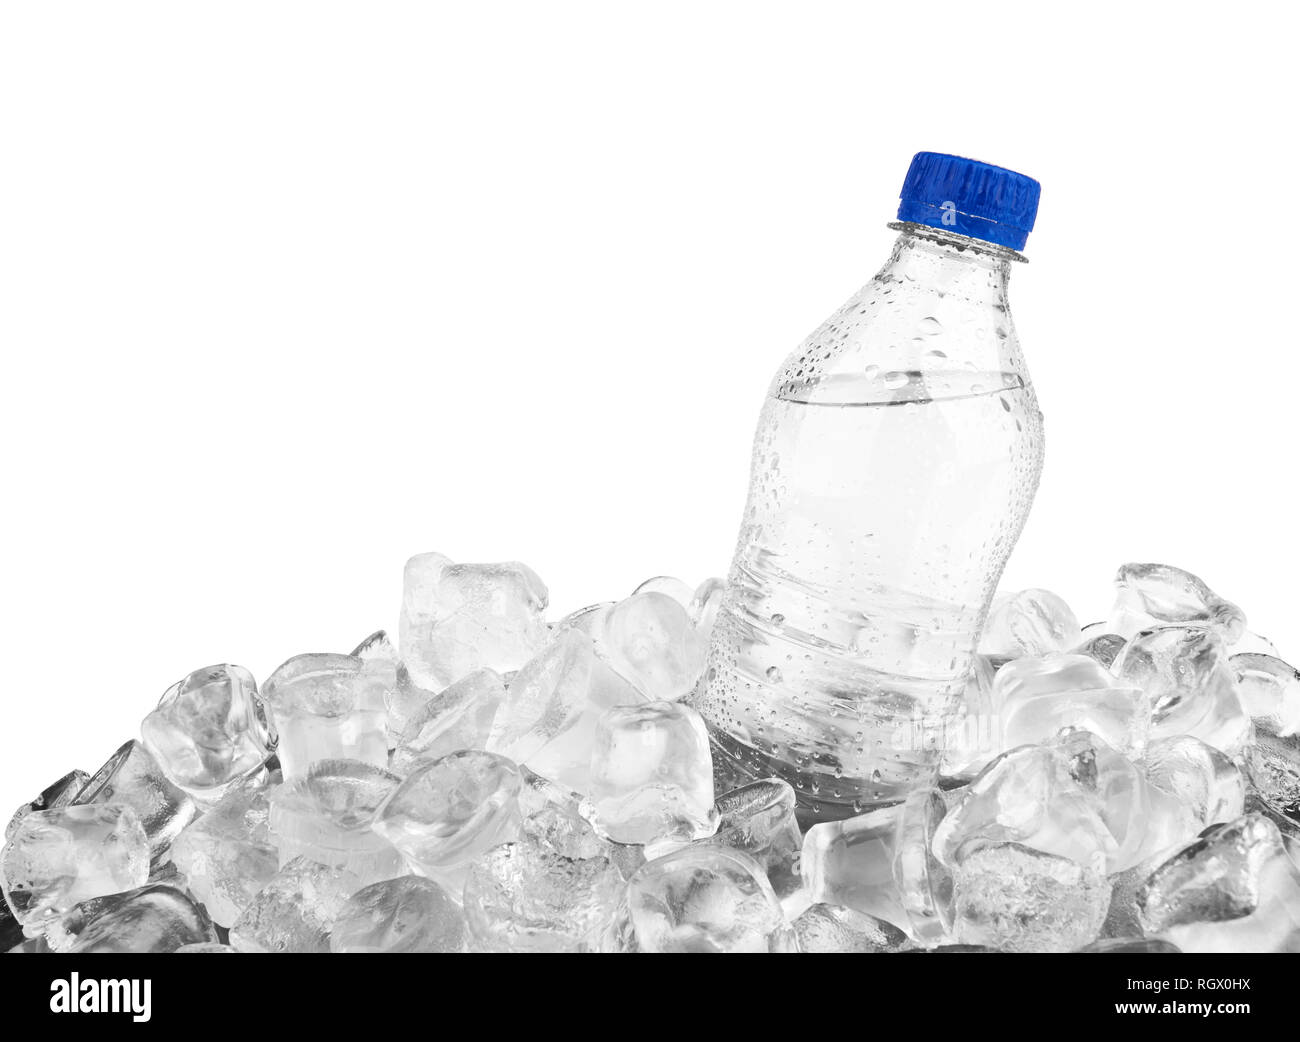 https://c8.alamy.com/comp/RGX0HX/water-bottle-in-ice-cube-isolated-on-a-white-background-RGX0HX.jpg